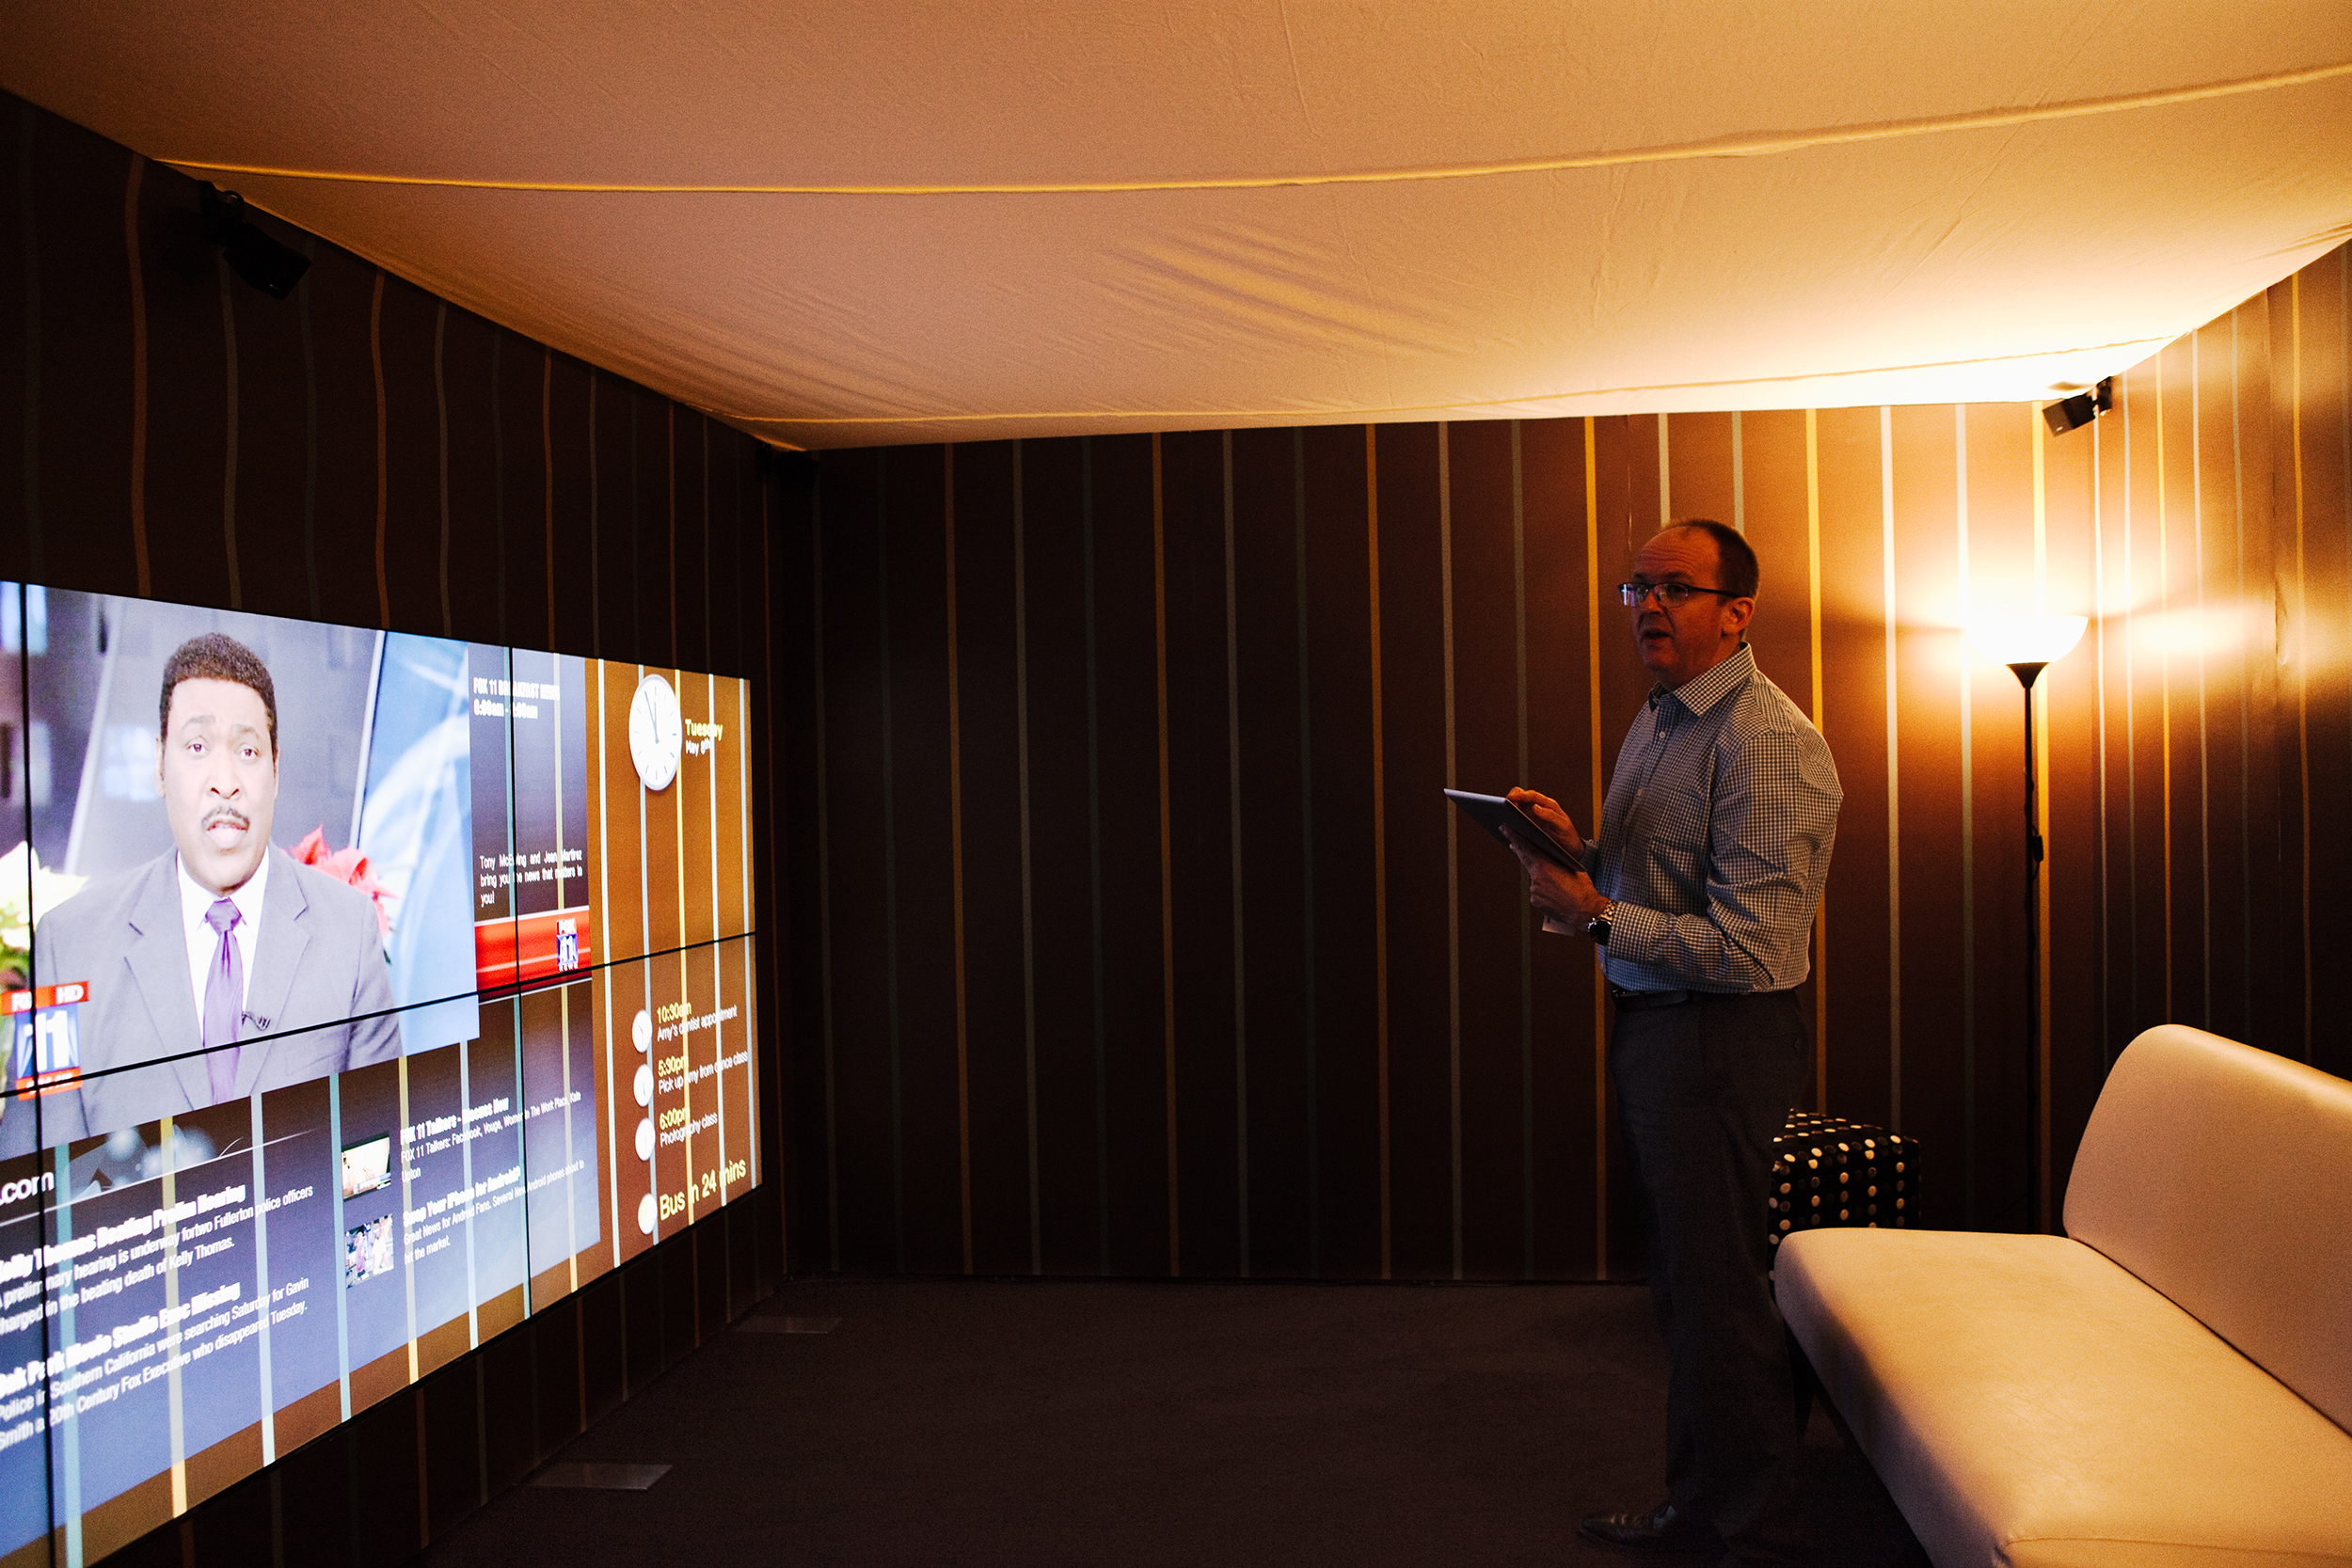 Skip To Story Nds Cto Nick Thexton Demonstrates How Future Televisions